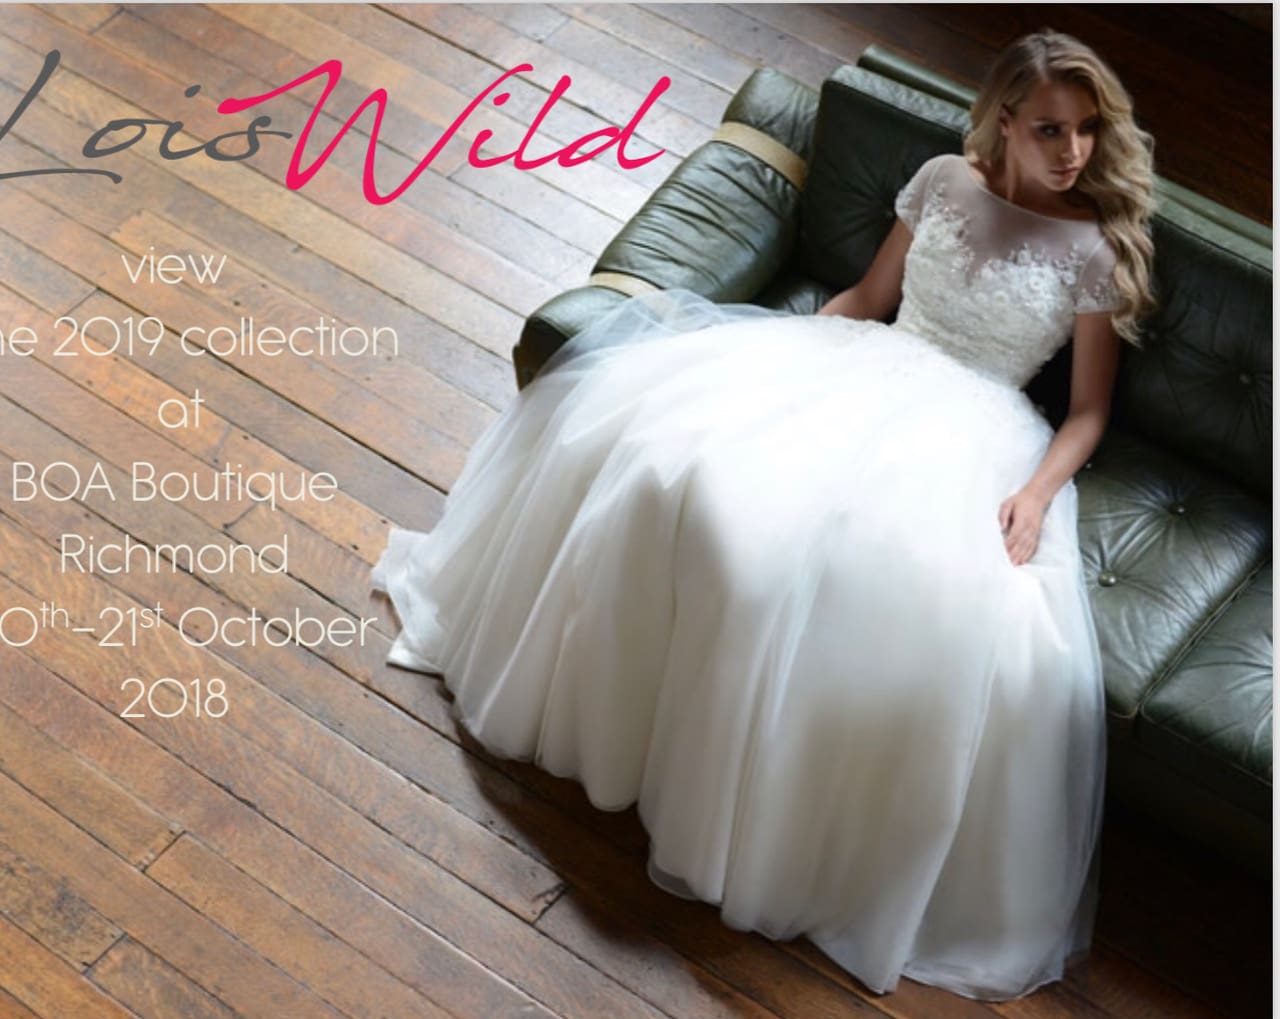 Lois Wild 2019 Trunk Show this Weekend at BOA Boutique, Richmond Hill – 20th & 21st October